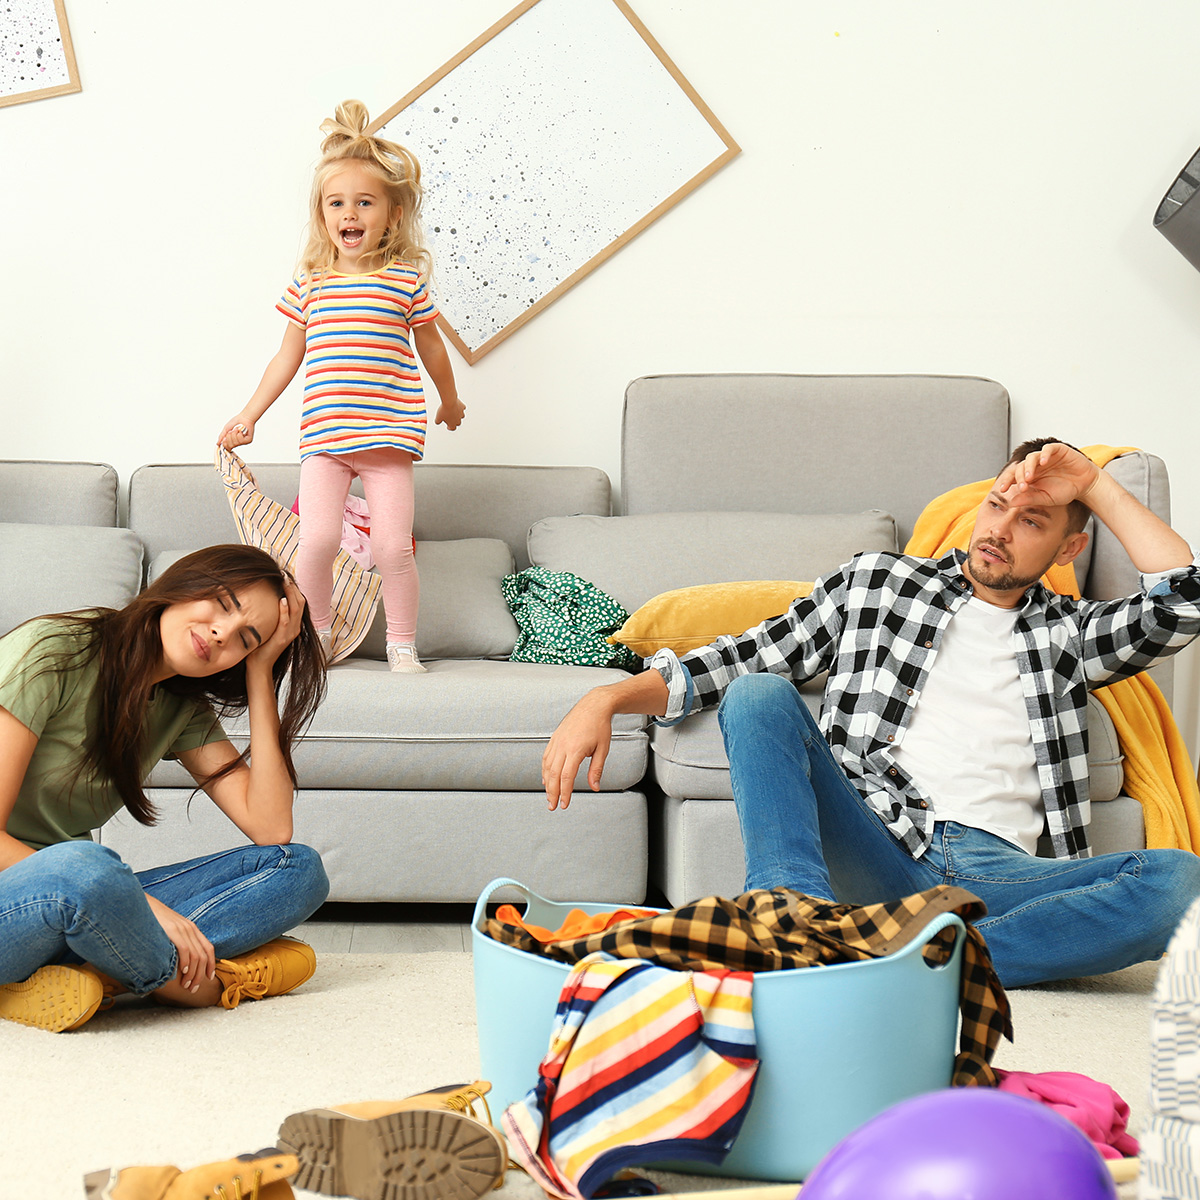 parents exhausted while kids creating chaos around them.